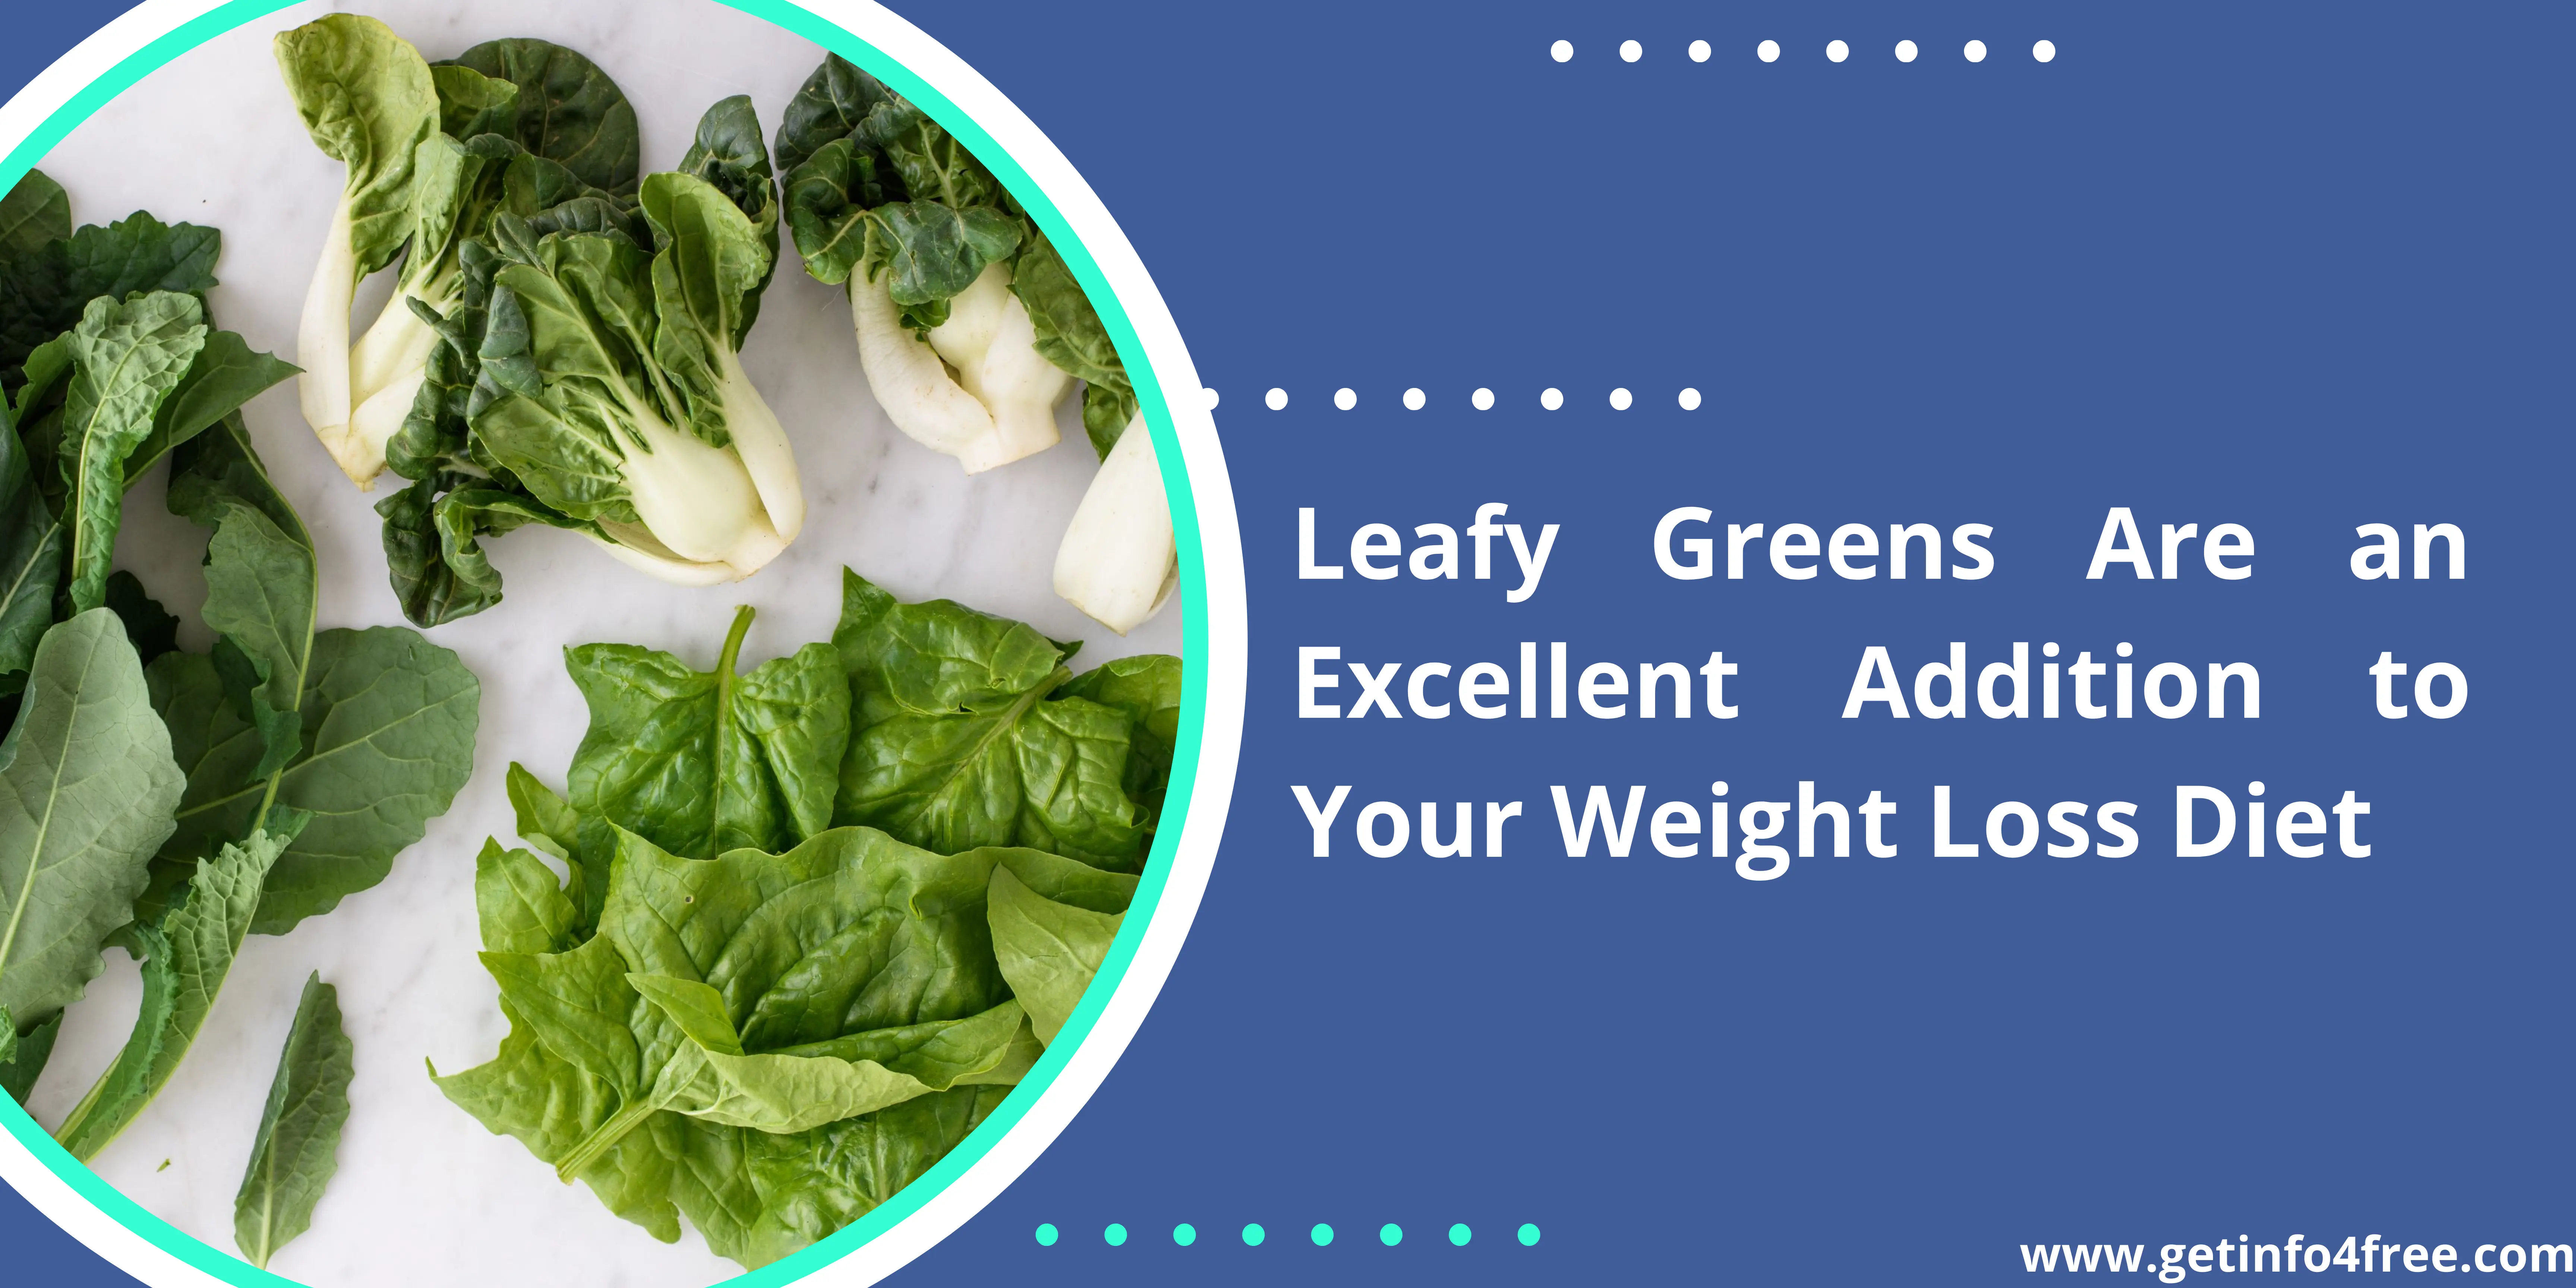 Leafy Greens Are an Excellent Addition to Your Weight Loss Diet